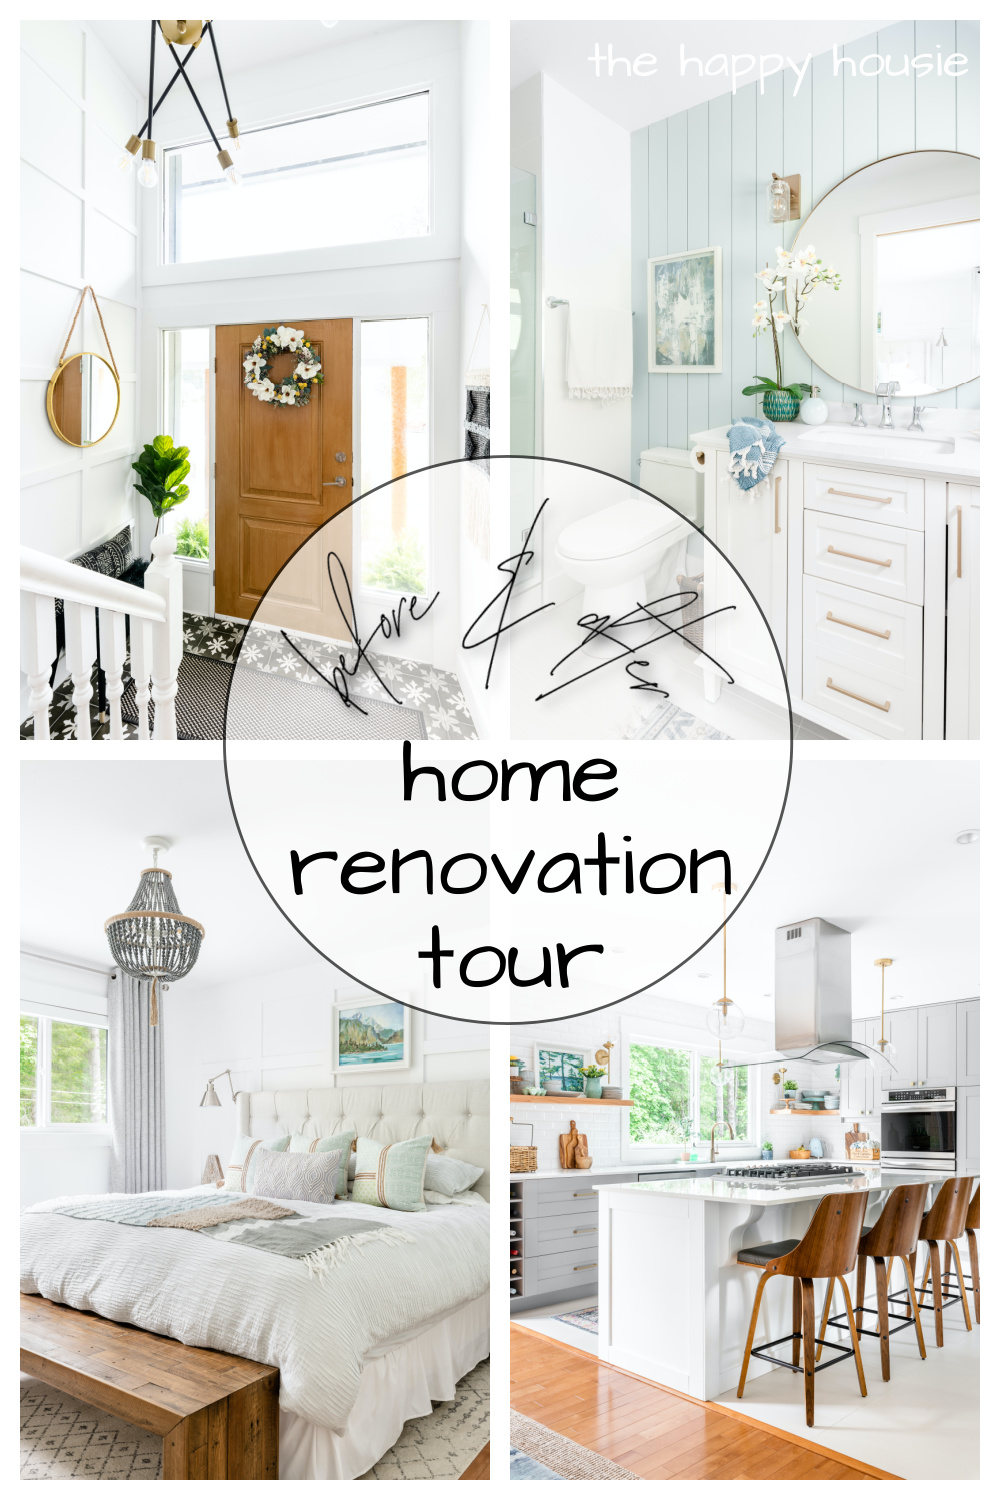 A collage featuring a bright and renovated foyer, bathroom, kitchen, and bedroom